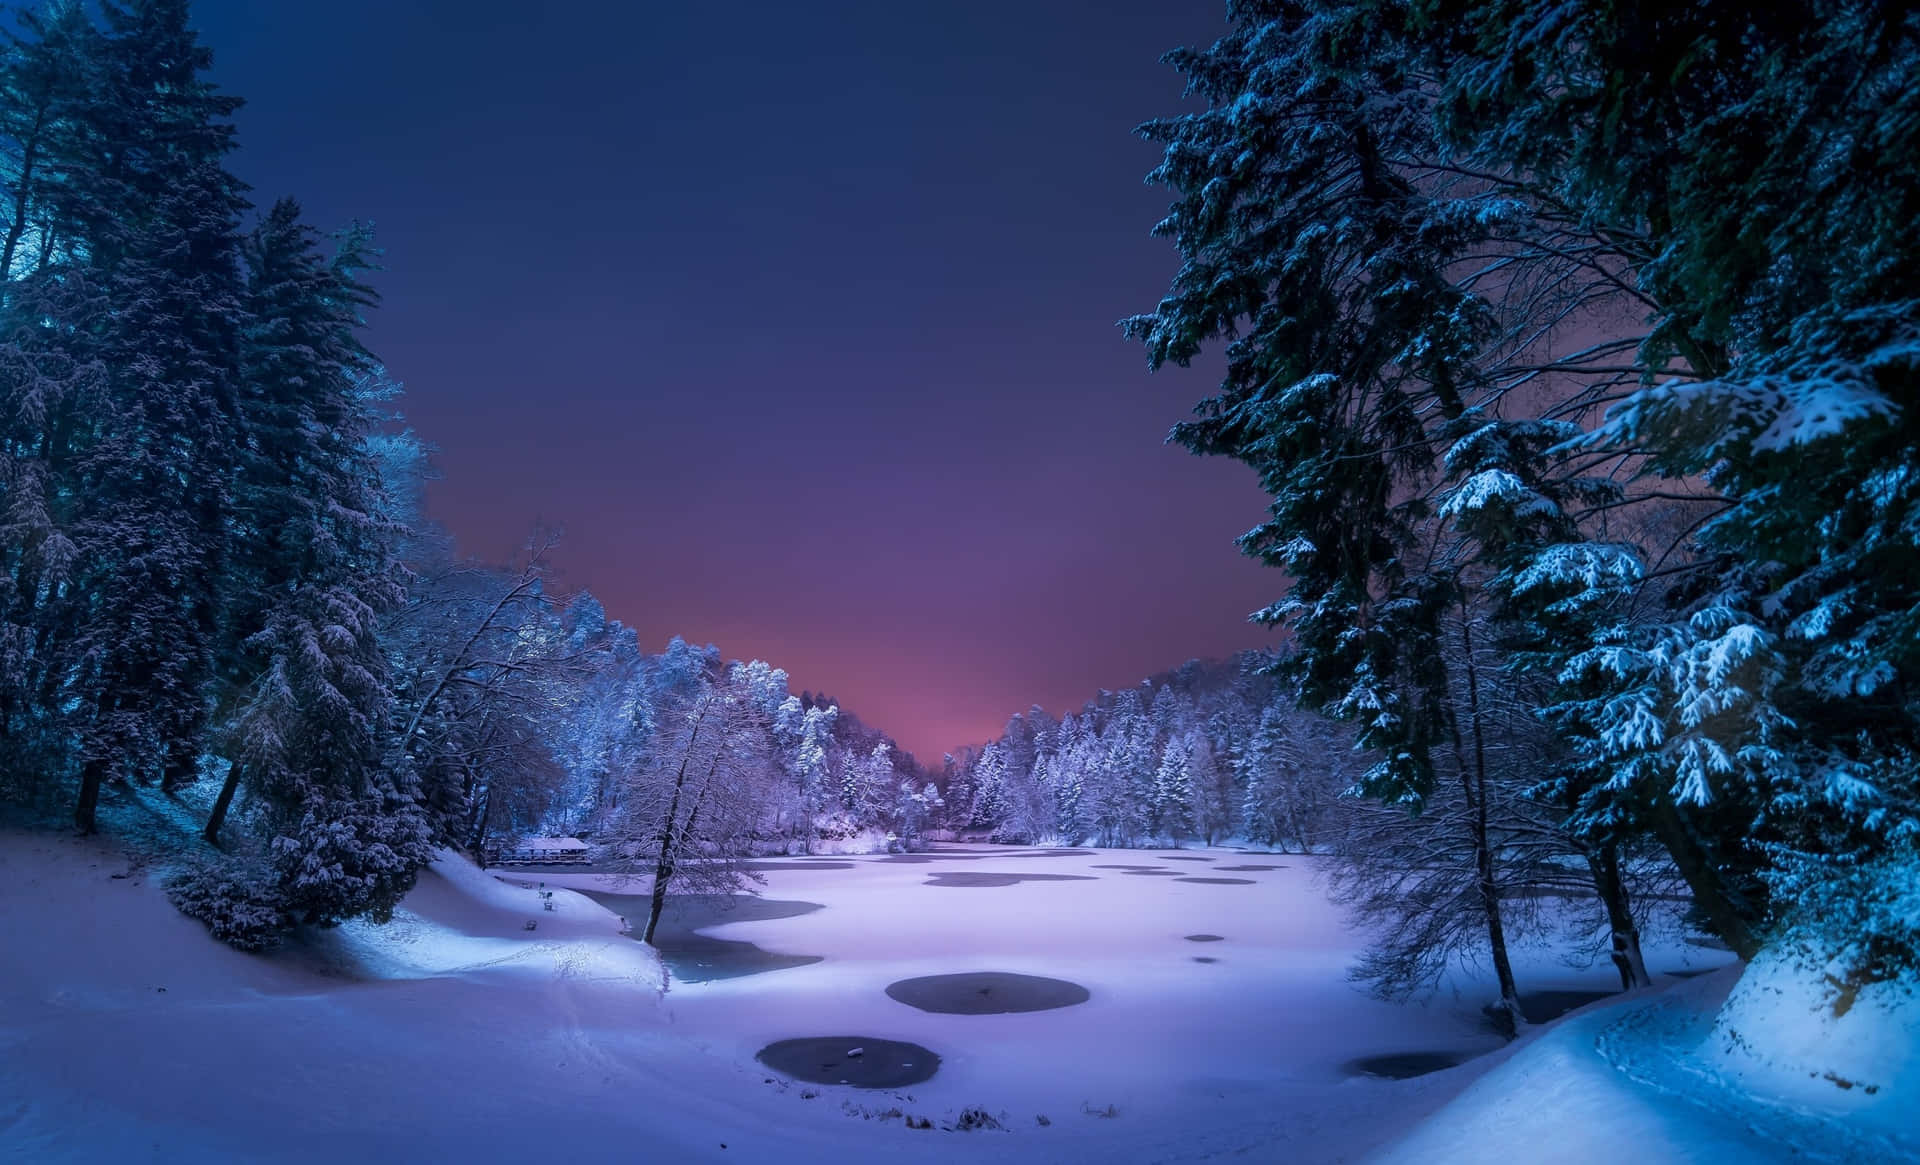 a snow covered lake at night with trees and snow